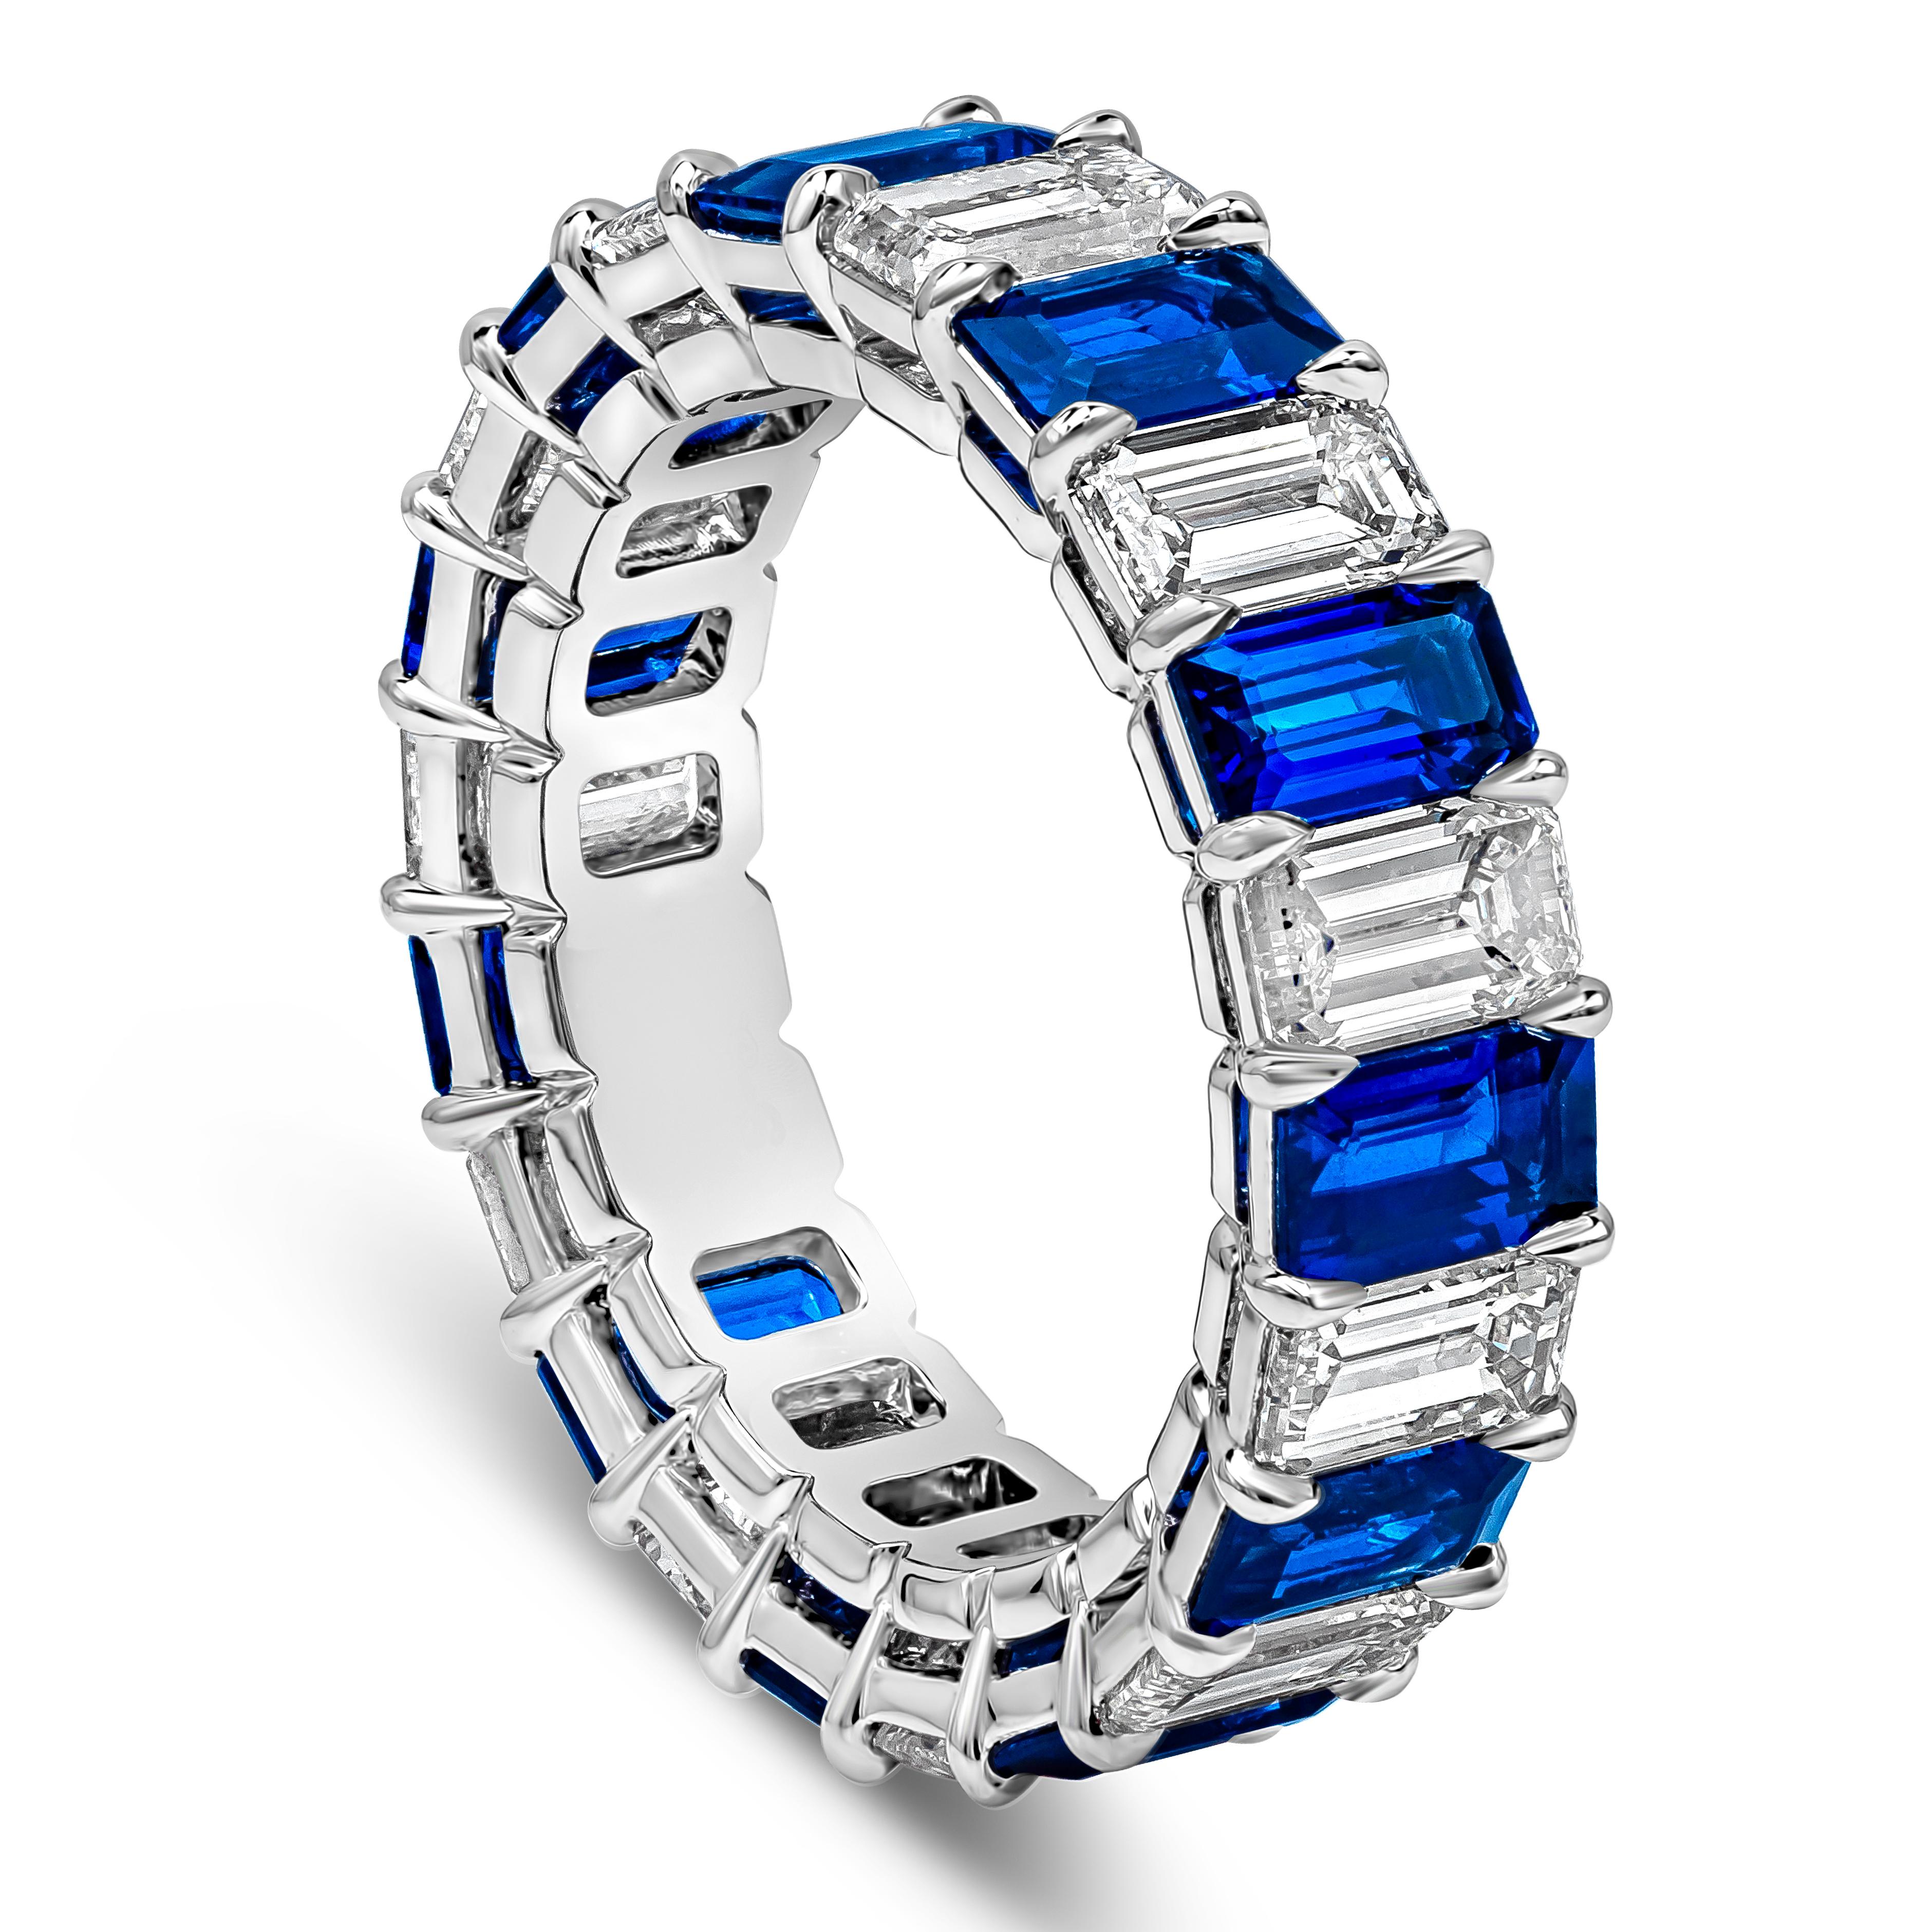 A beautiful and vibrant eternity wedding band style showcasing alternating emerald cut blue sapphires weighing 3.71 carats total, VS+ in Clarity, and emerald cut diamonds weighing 3.35 carats total, H+ Color and VS+ in Clarity. Set in a